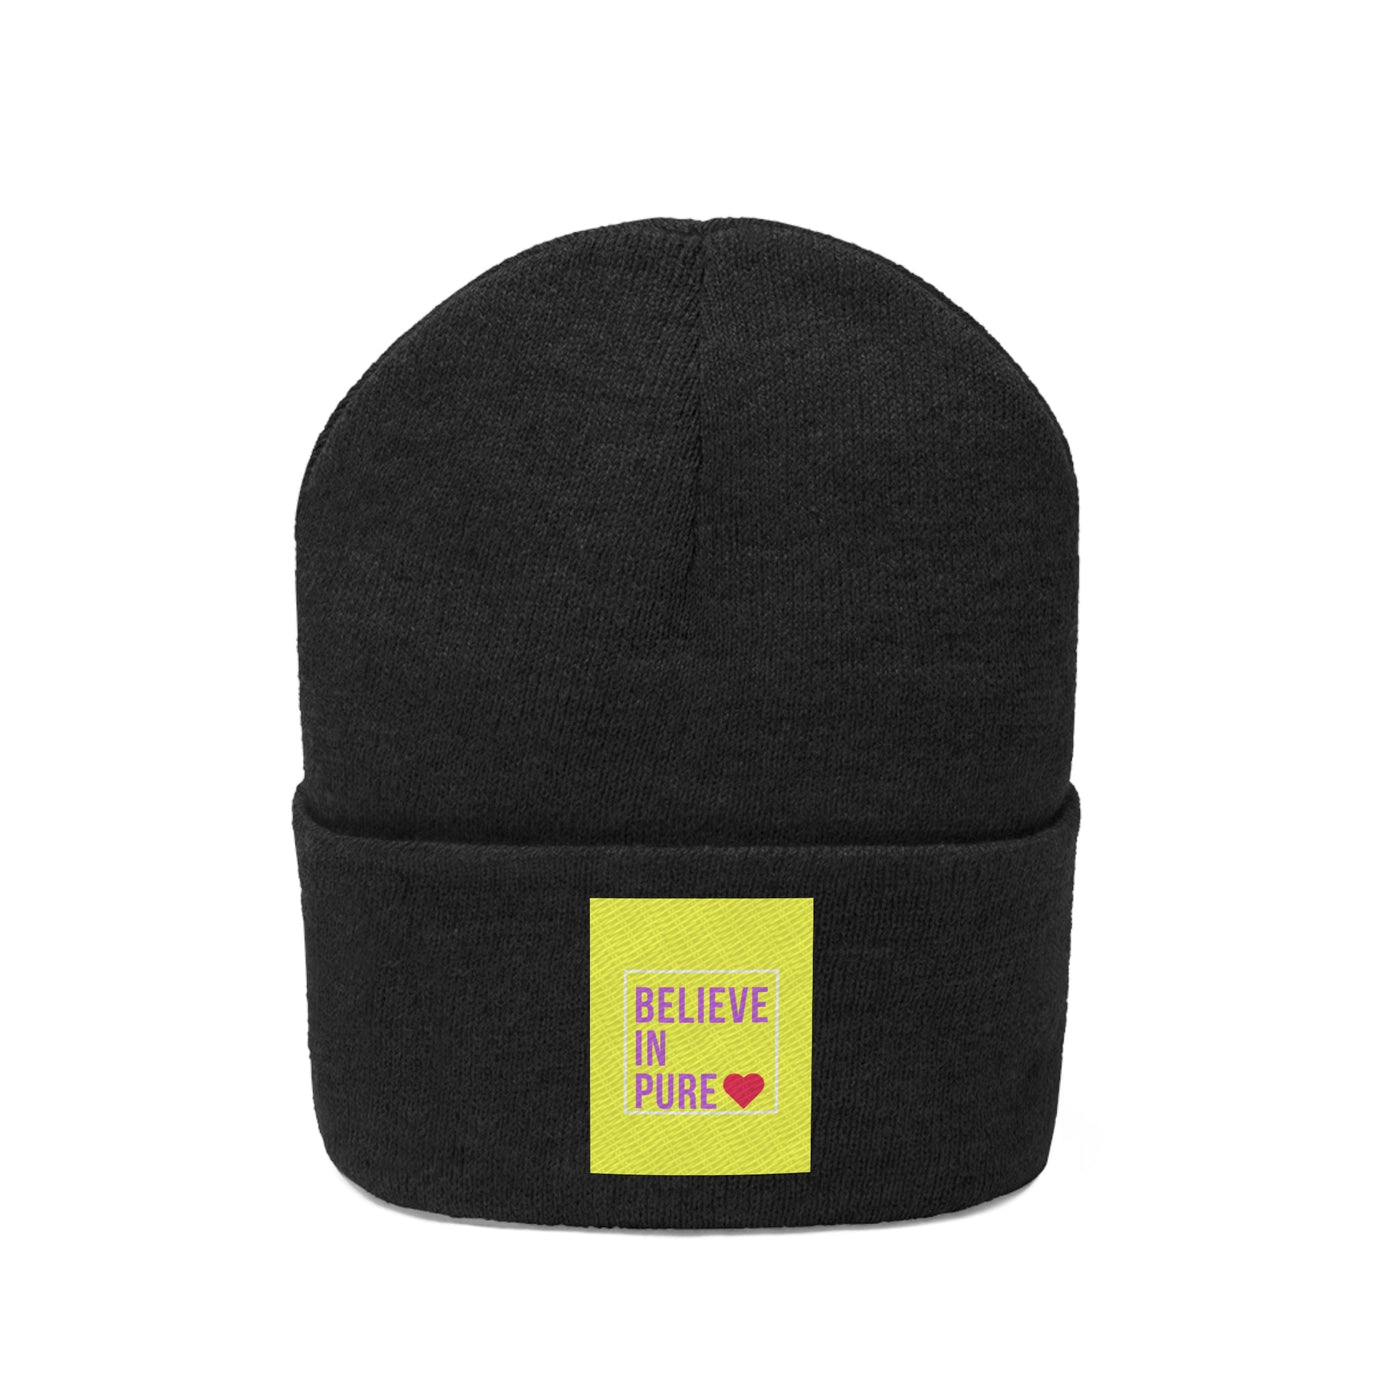 The Do You Believe In Love Yellow Jacket/Black Knitted Beanie Hat